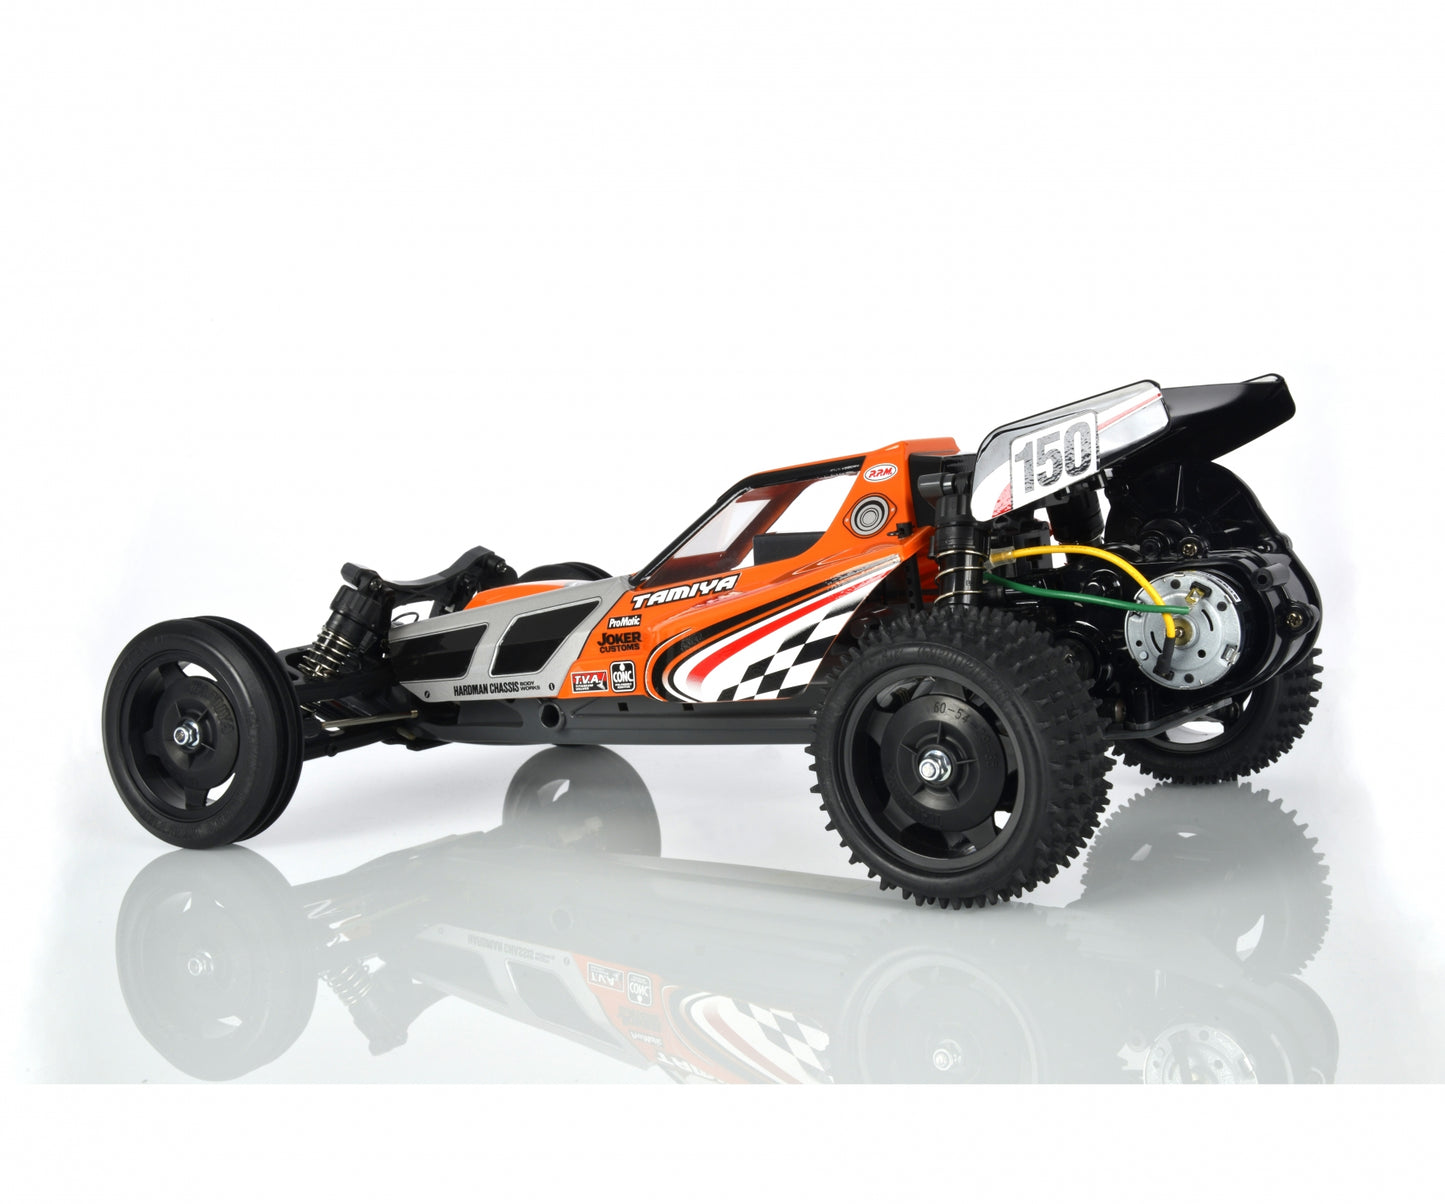 Racing Fighter 2WD RC-Buggy (DT-03), Bausatz